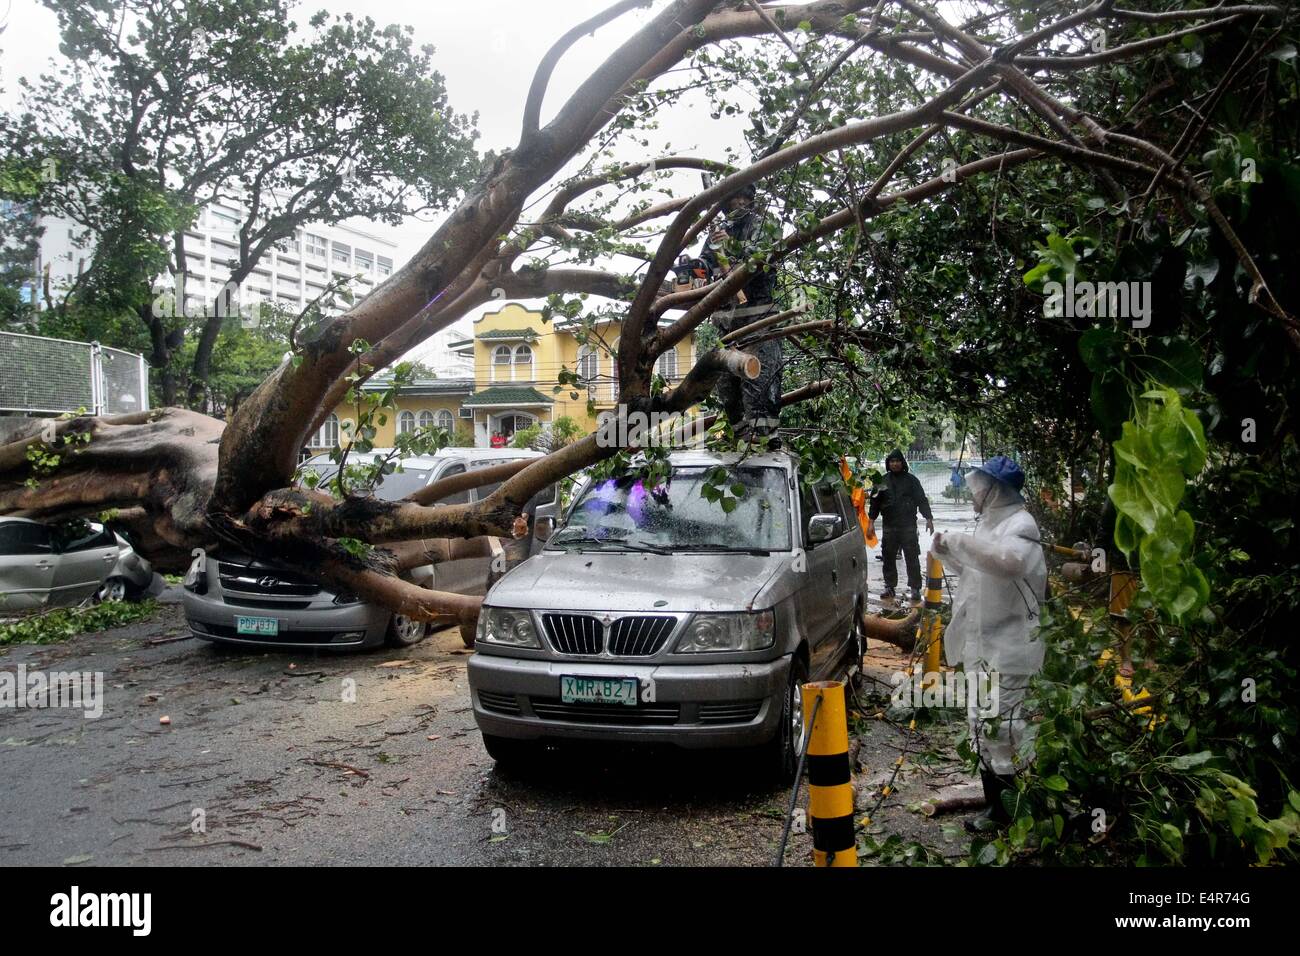 Manila, Philippines. 16th July, 2014. A giant tree crushes three cars nearby a private subdivision in Makati City as Typhoon Rammasun hit Metro Manila. Typhoon Rammasun (locally known as Glenda) had maximum sustained winds of 150 kph and gustiness of up to 185 kph when it hit Metro Manila. Across the country, about 400,000 people had fled their homes and sheltered in evacuation centers, according to the disaster management council. © PACIFIC PRESS/Alamy Live News Stock Photo